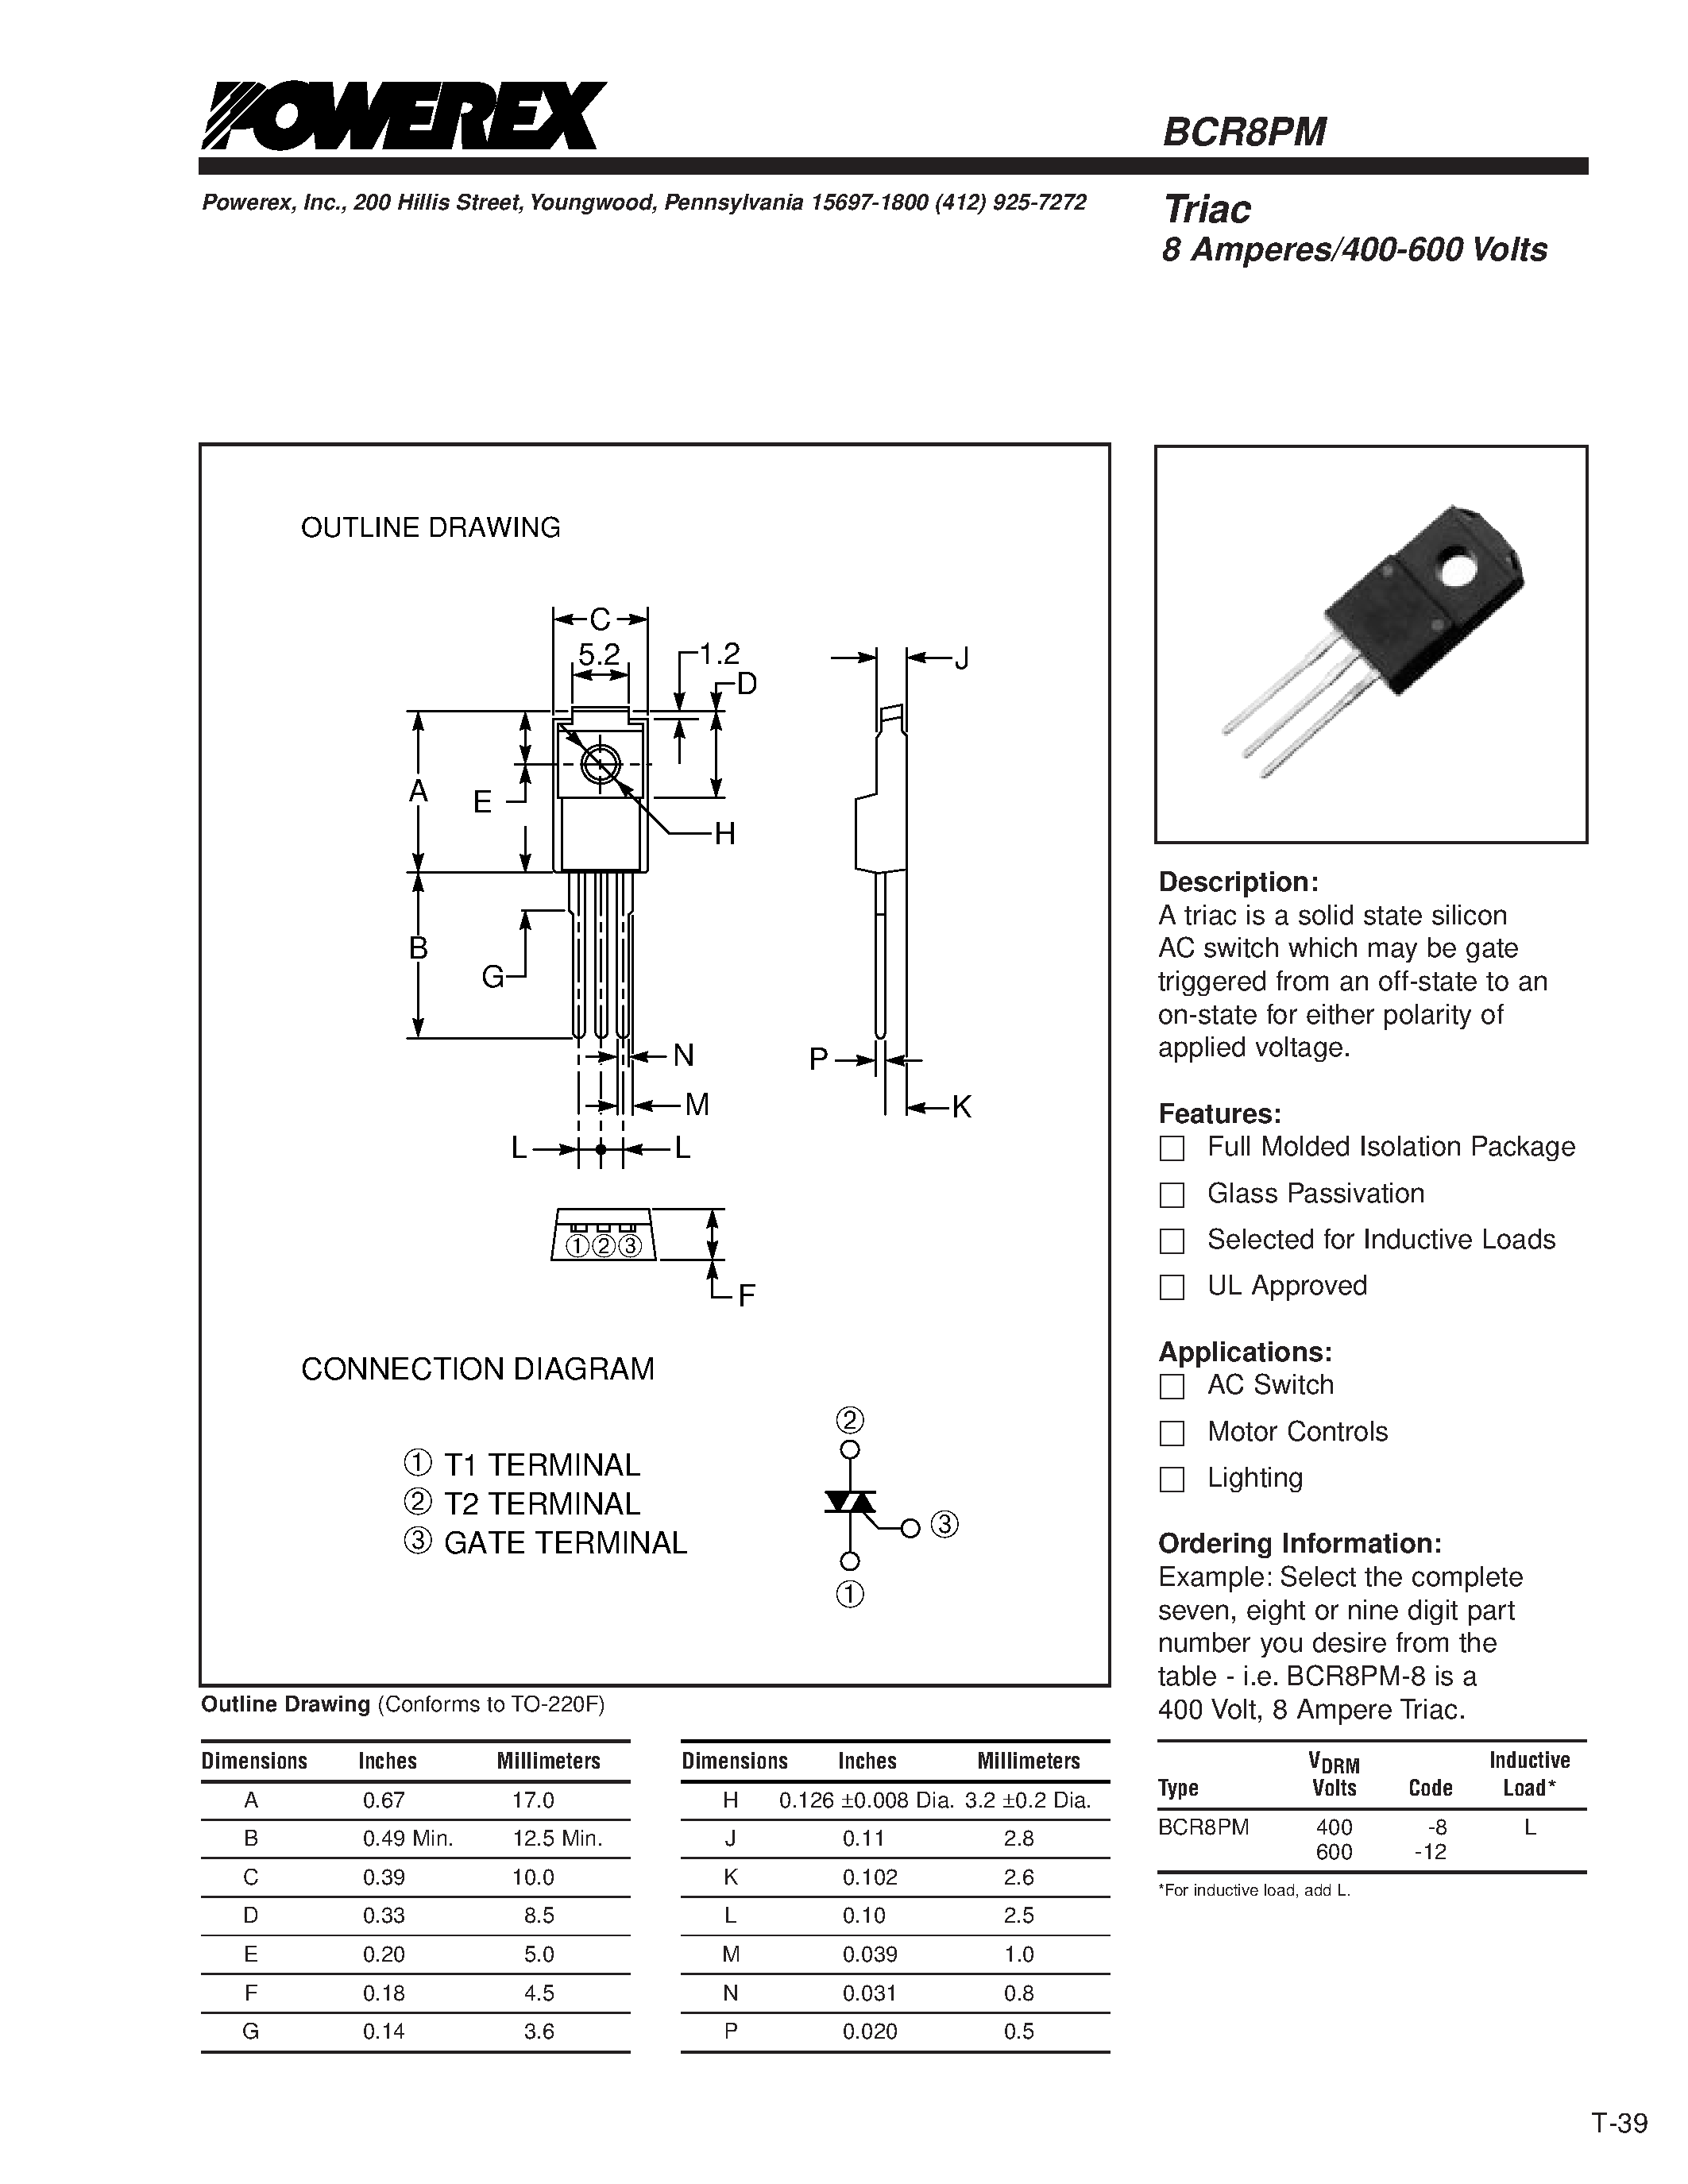 Datasheet BCR8PM-8 - Triac 8 Amperes/400-600 Volts page 1